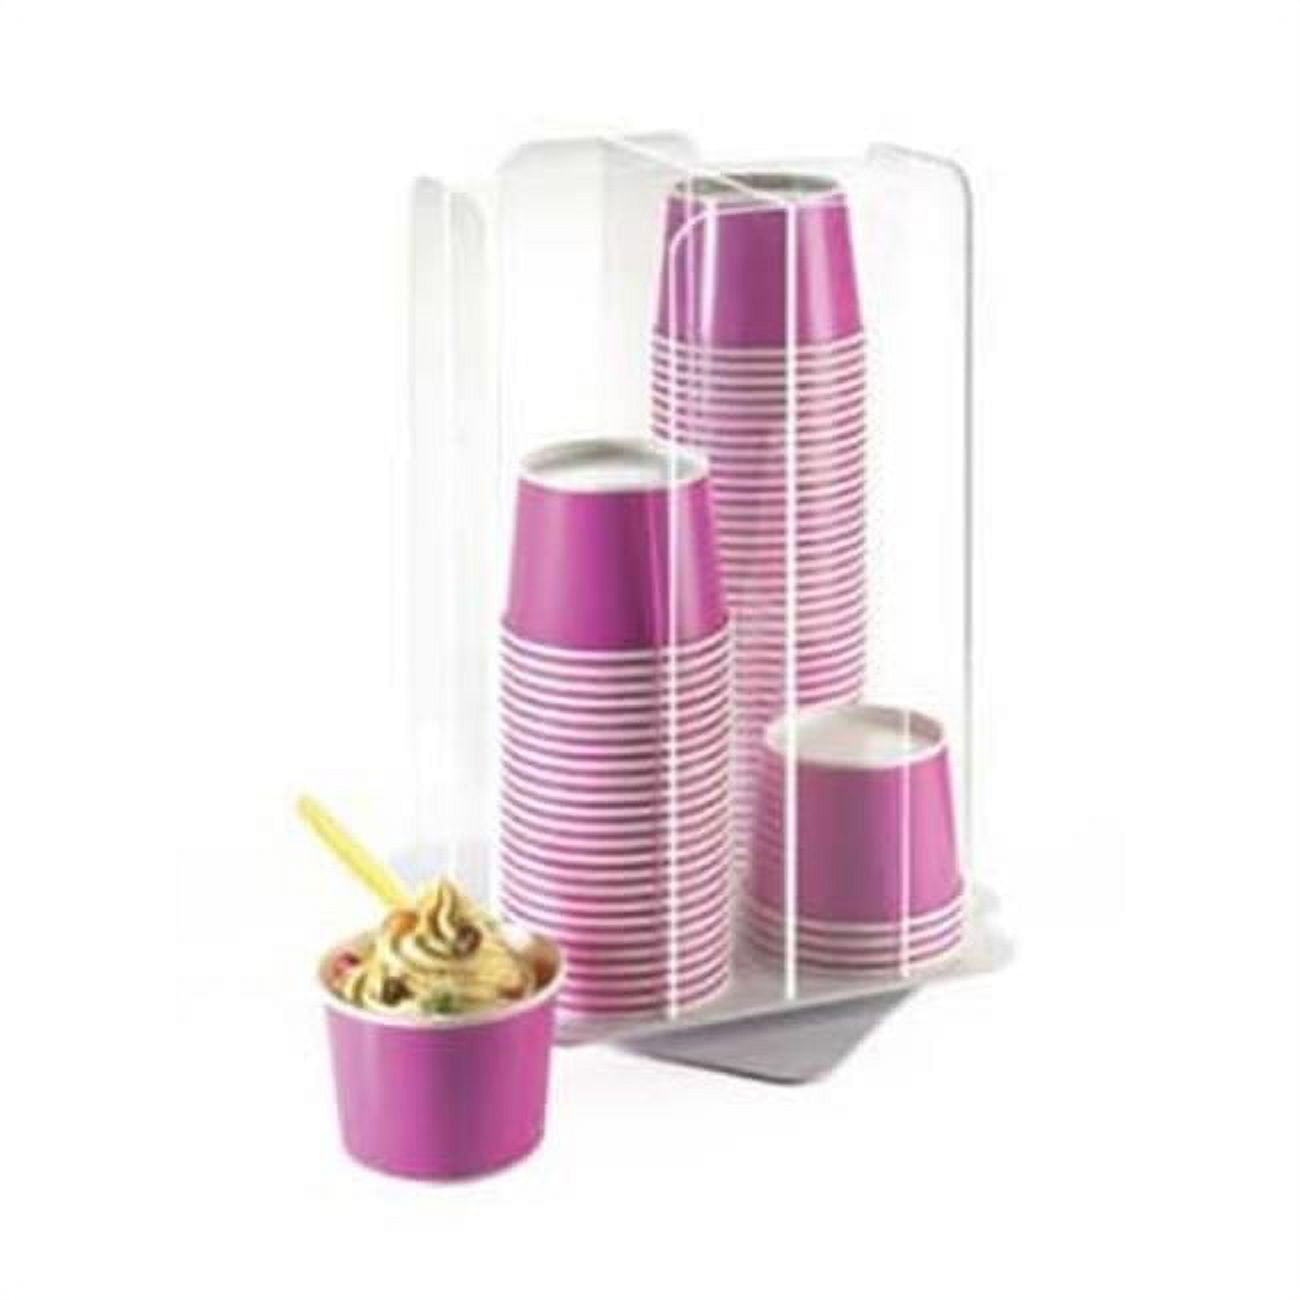 Picture of Cal Mil 1539-12 Revolving Cup & Cereal Cup Dispenser - 10 x 10 x 16.75 in.